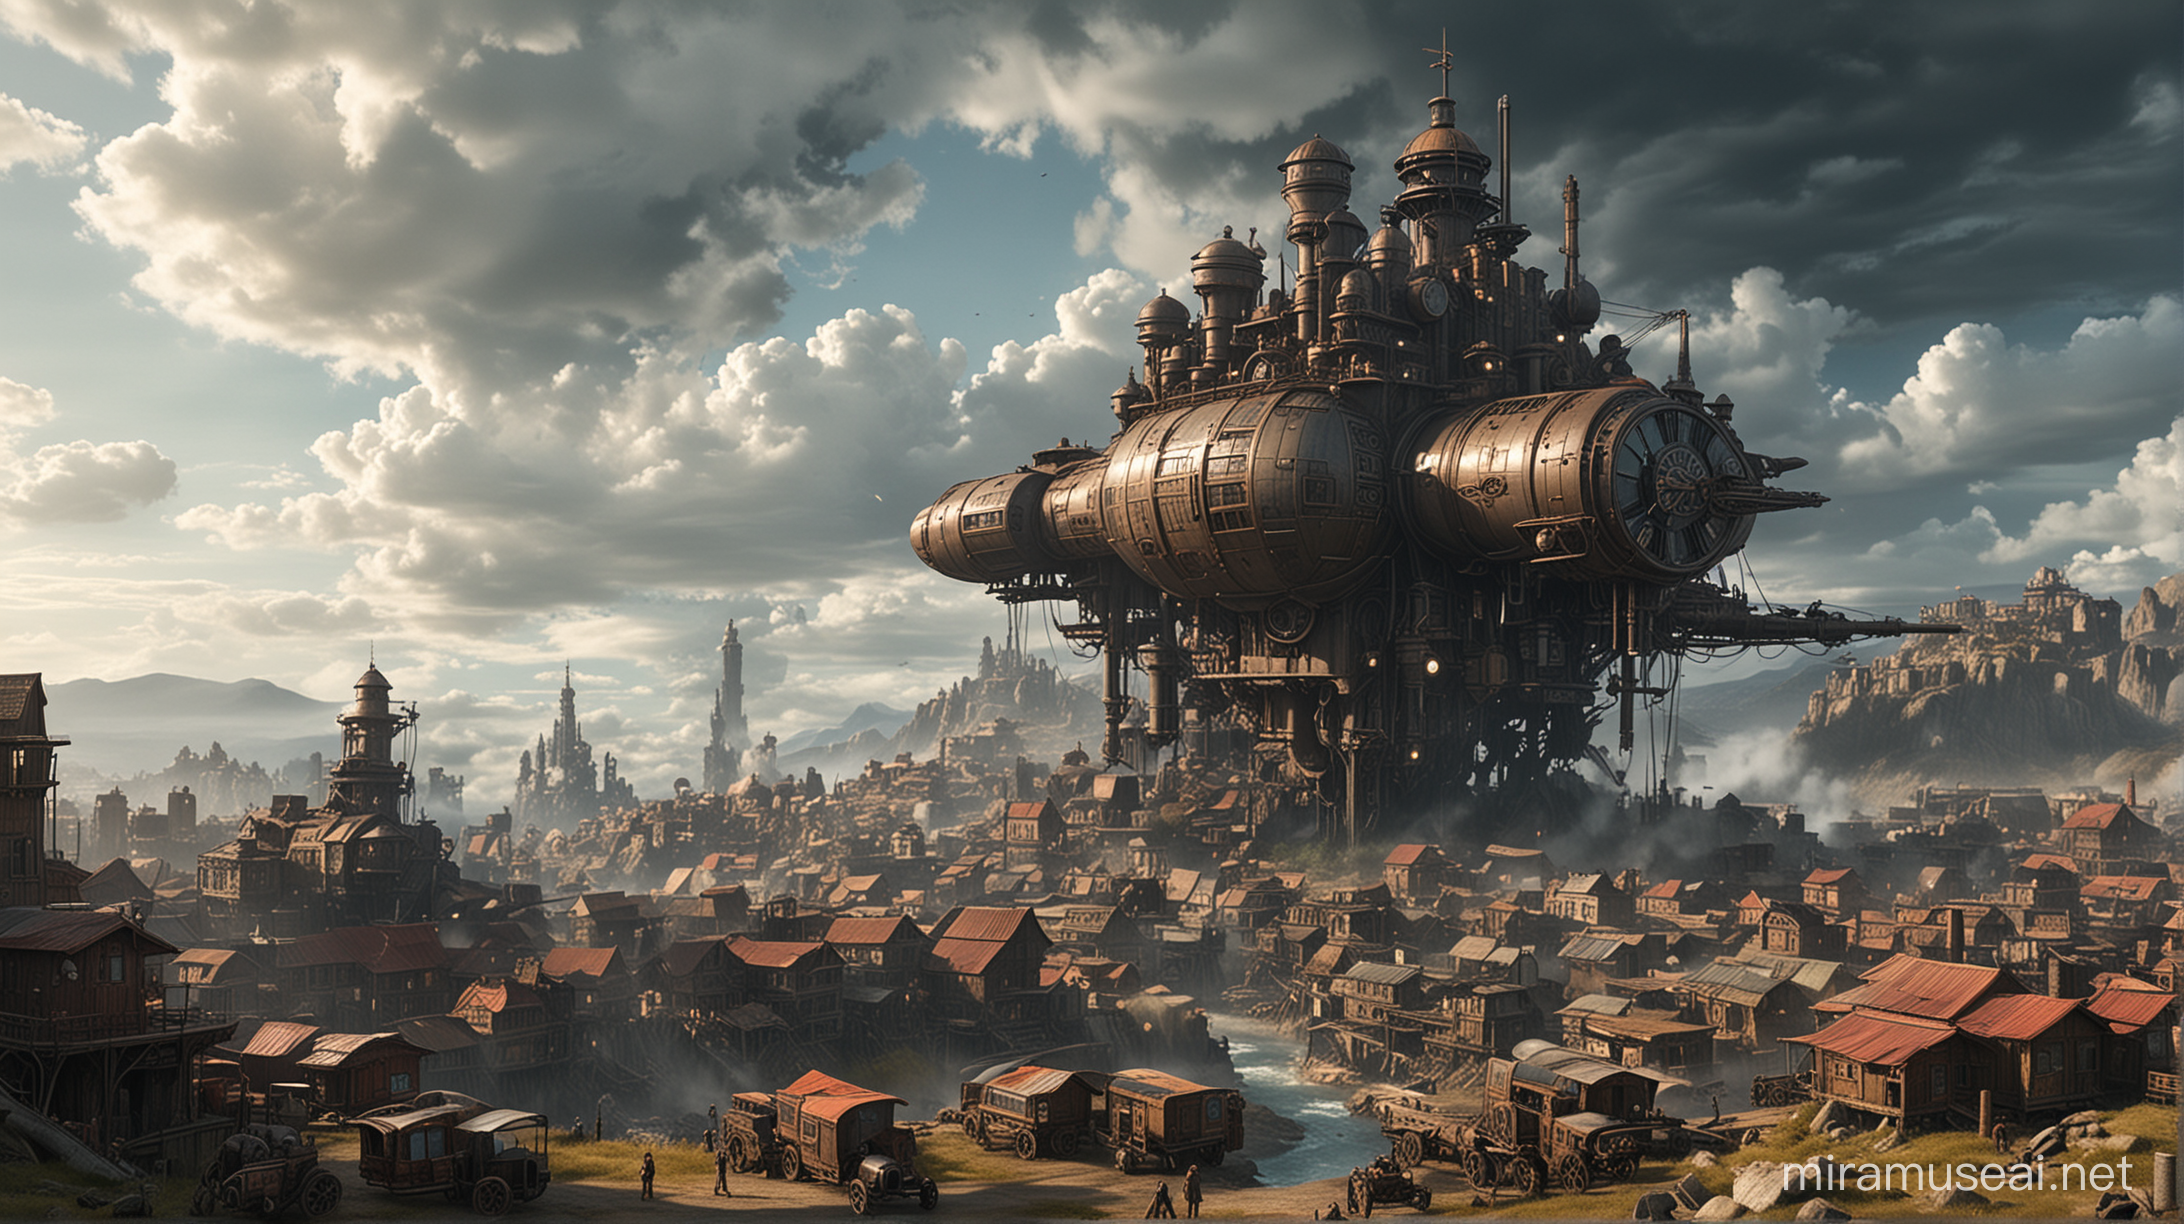 Steampunk Mobile City Roaming Wild Cloudy Landscape